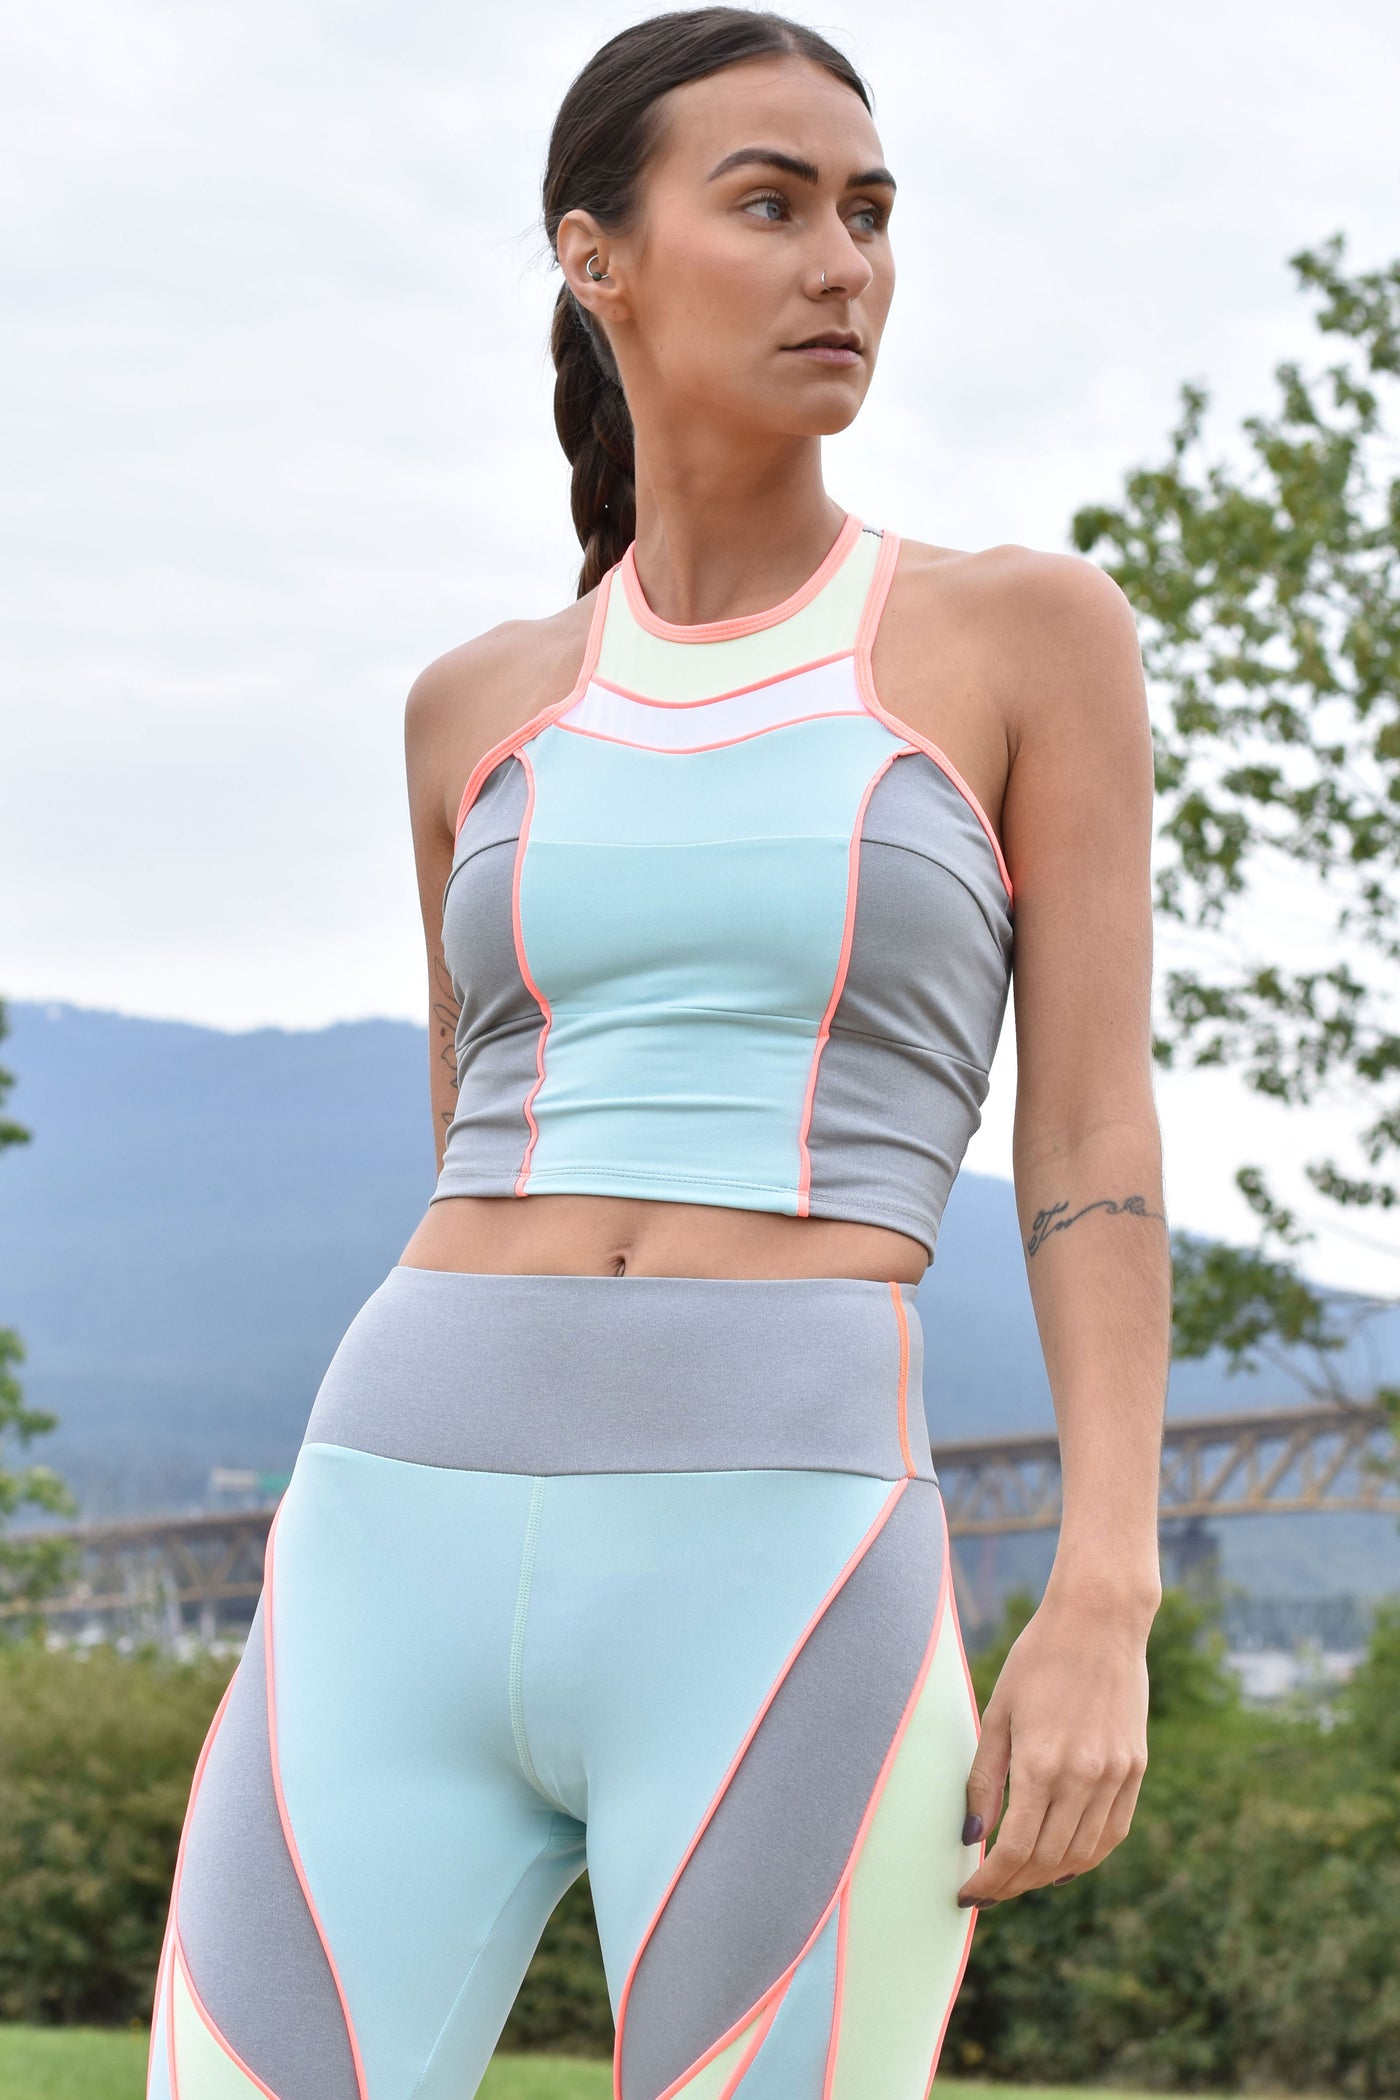 Gymshark Women's Activewear for sale in Vancouver, British Columbia, Facebook Marketplace